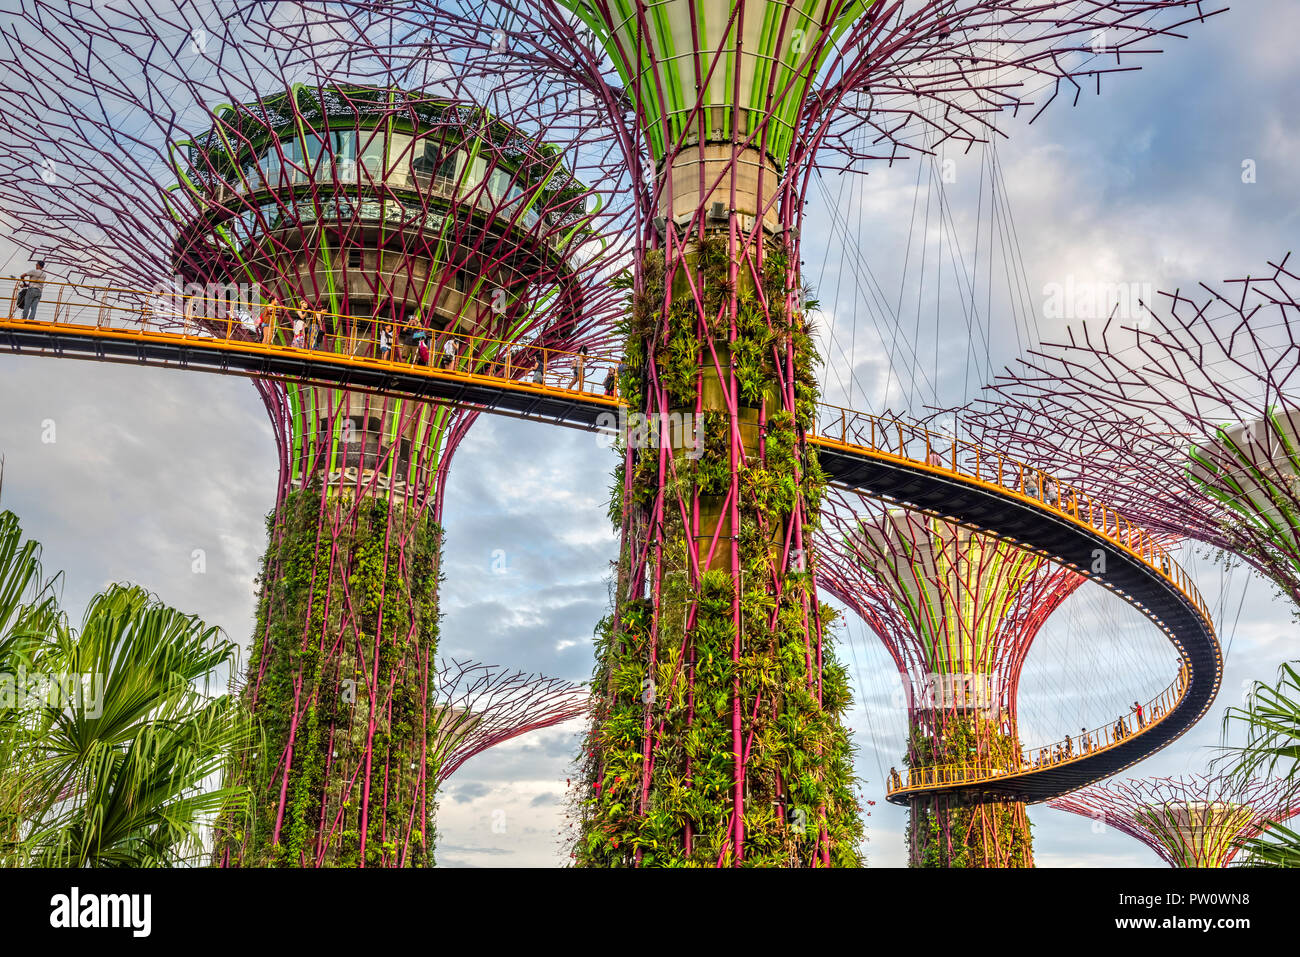 The Supertree Grove at Gardens by the Bay nature park, Singapore Stock Photo